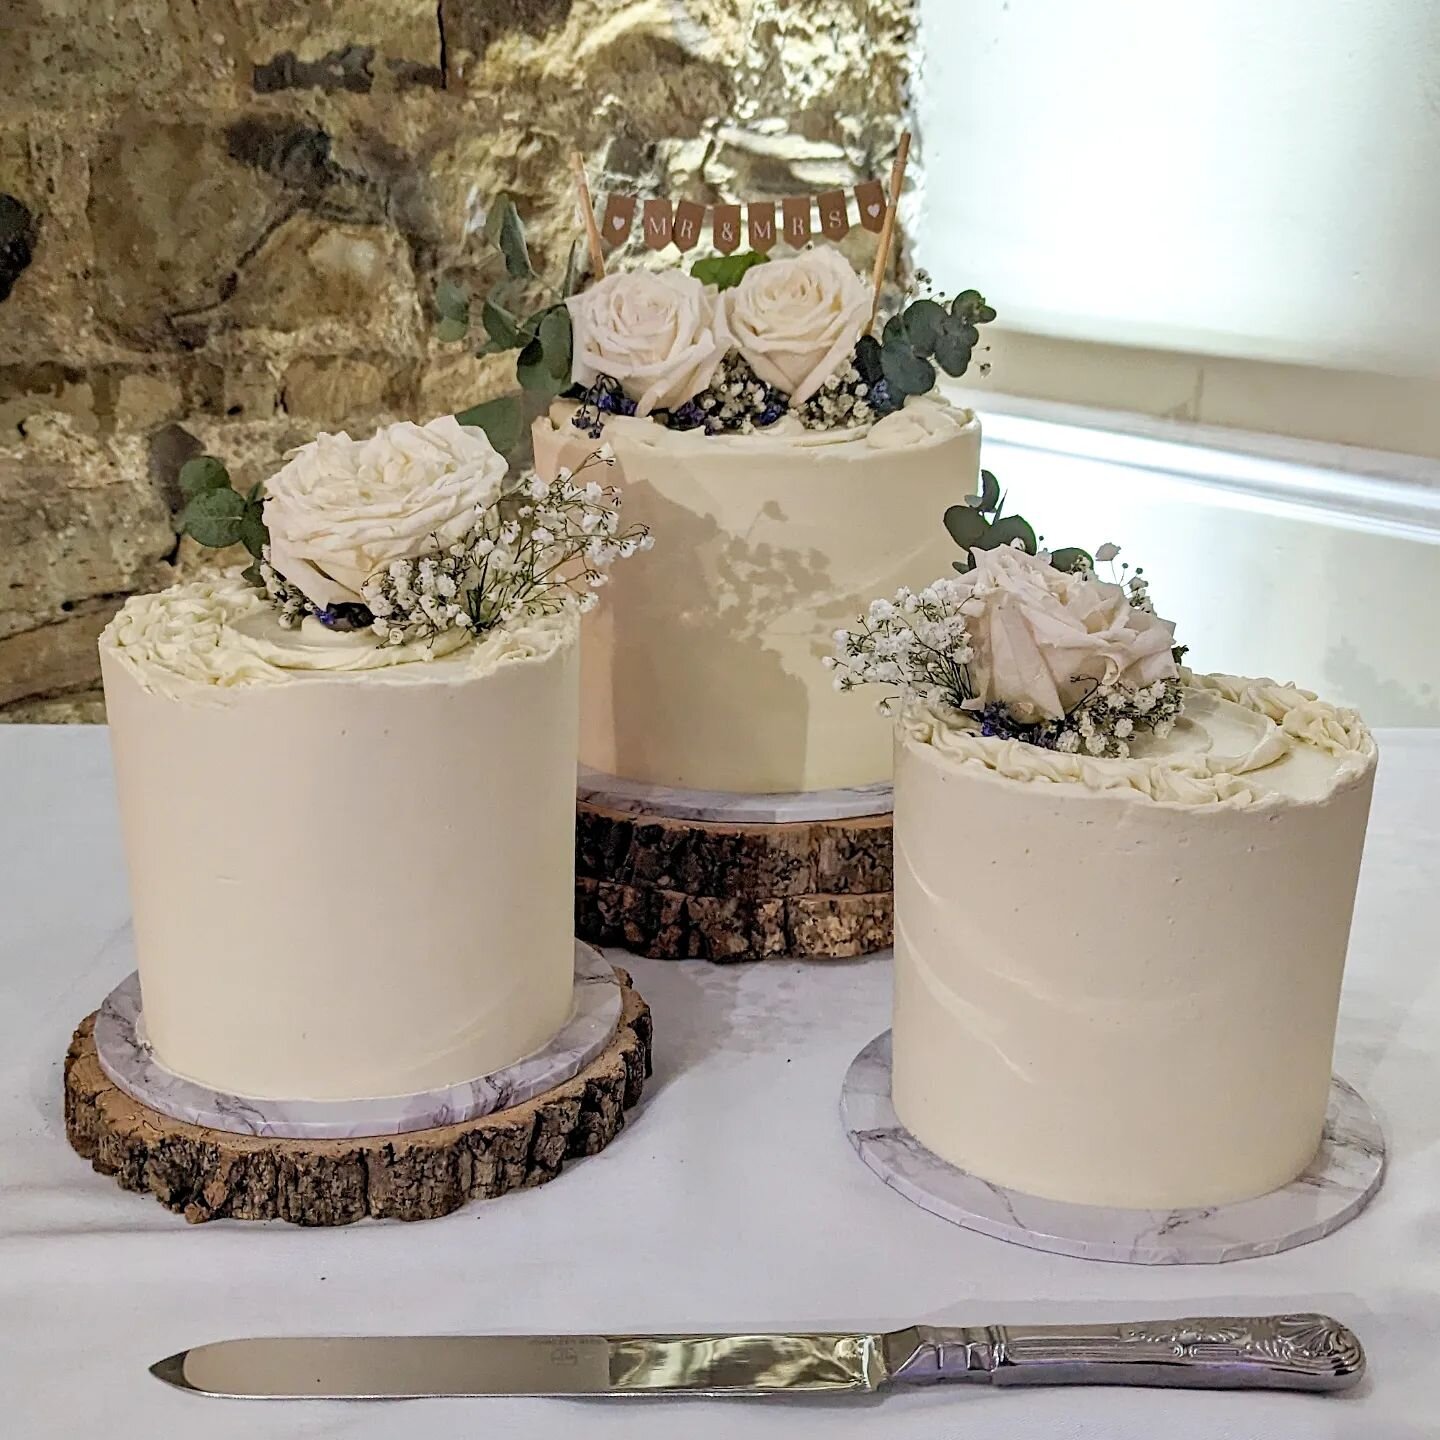 ✨ MR &amp; MRS DORRIAN ✨

Yesterday I had the honour of making my best friend's wedding cake - a 'deconstructed' tiered cake. 

Three individual cakes, decorated with fresh flowers. Flavours:

🍓 Classic Victoria Sponge
🍋 Zesty Lemon with homemade l